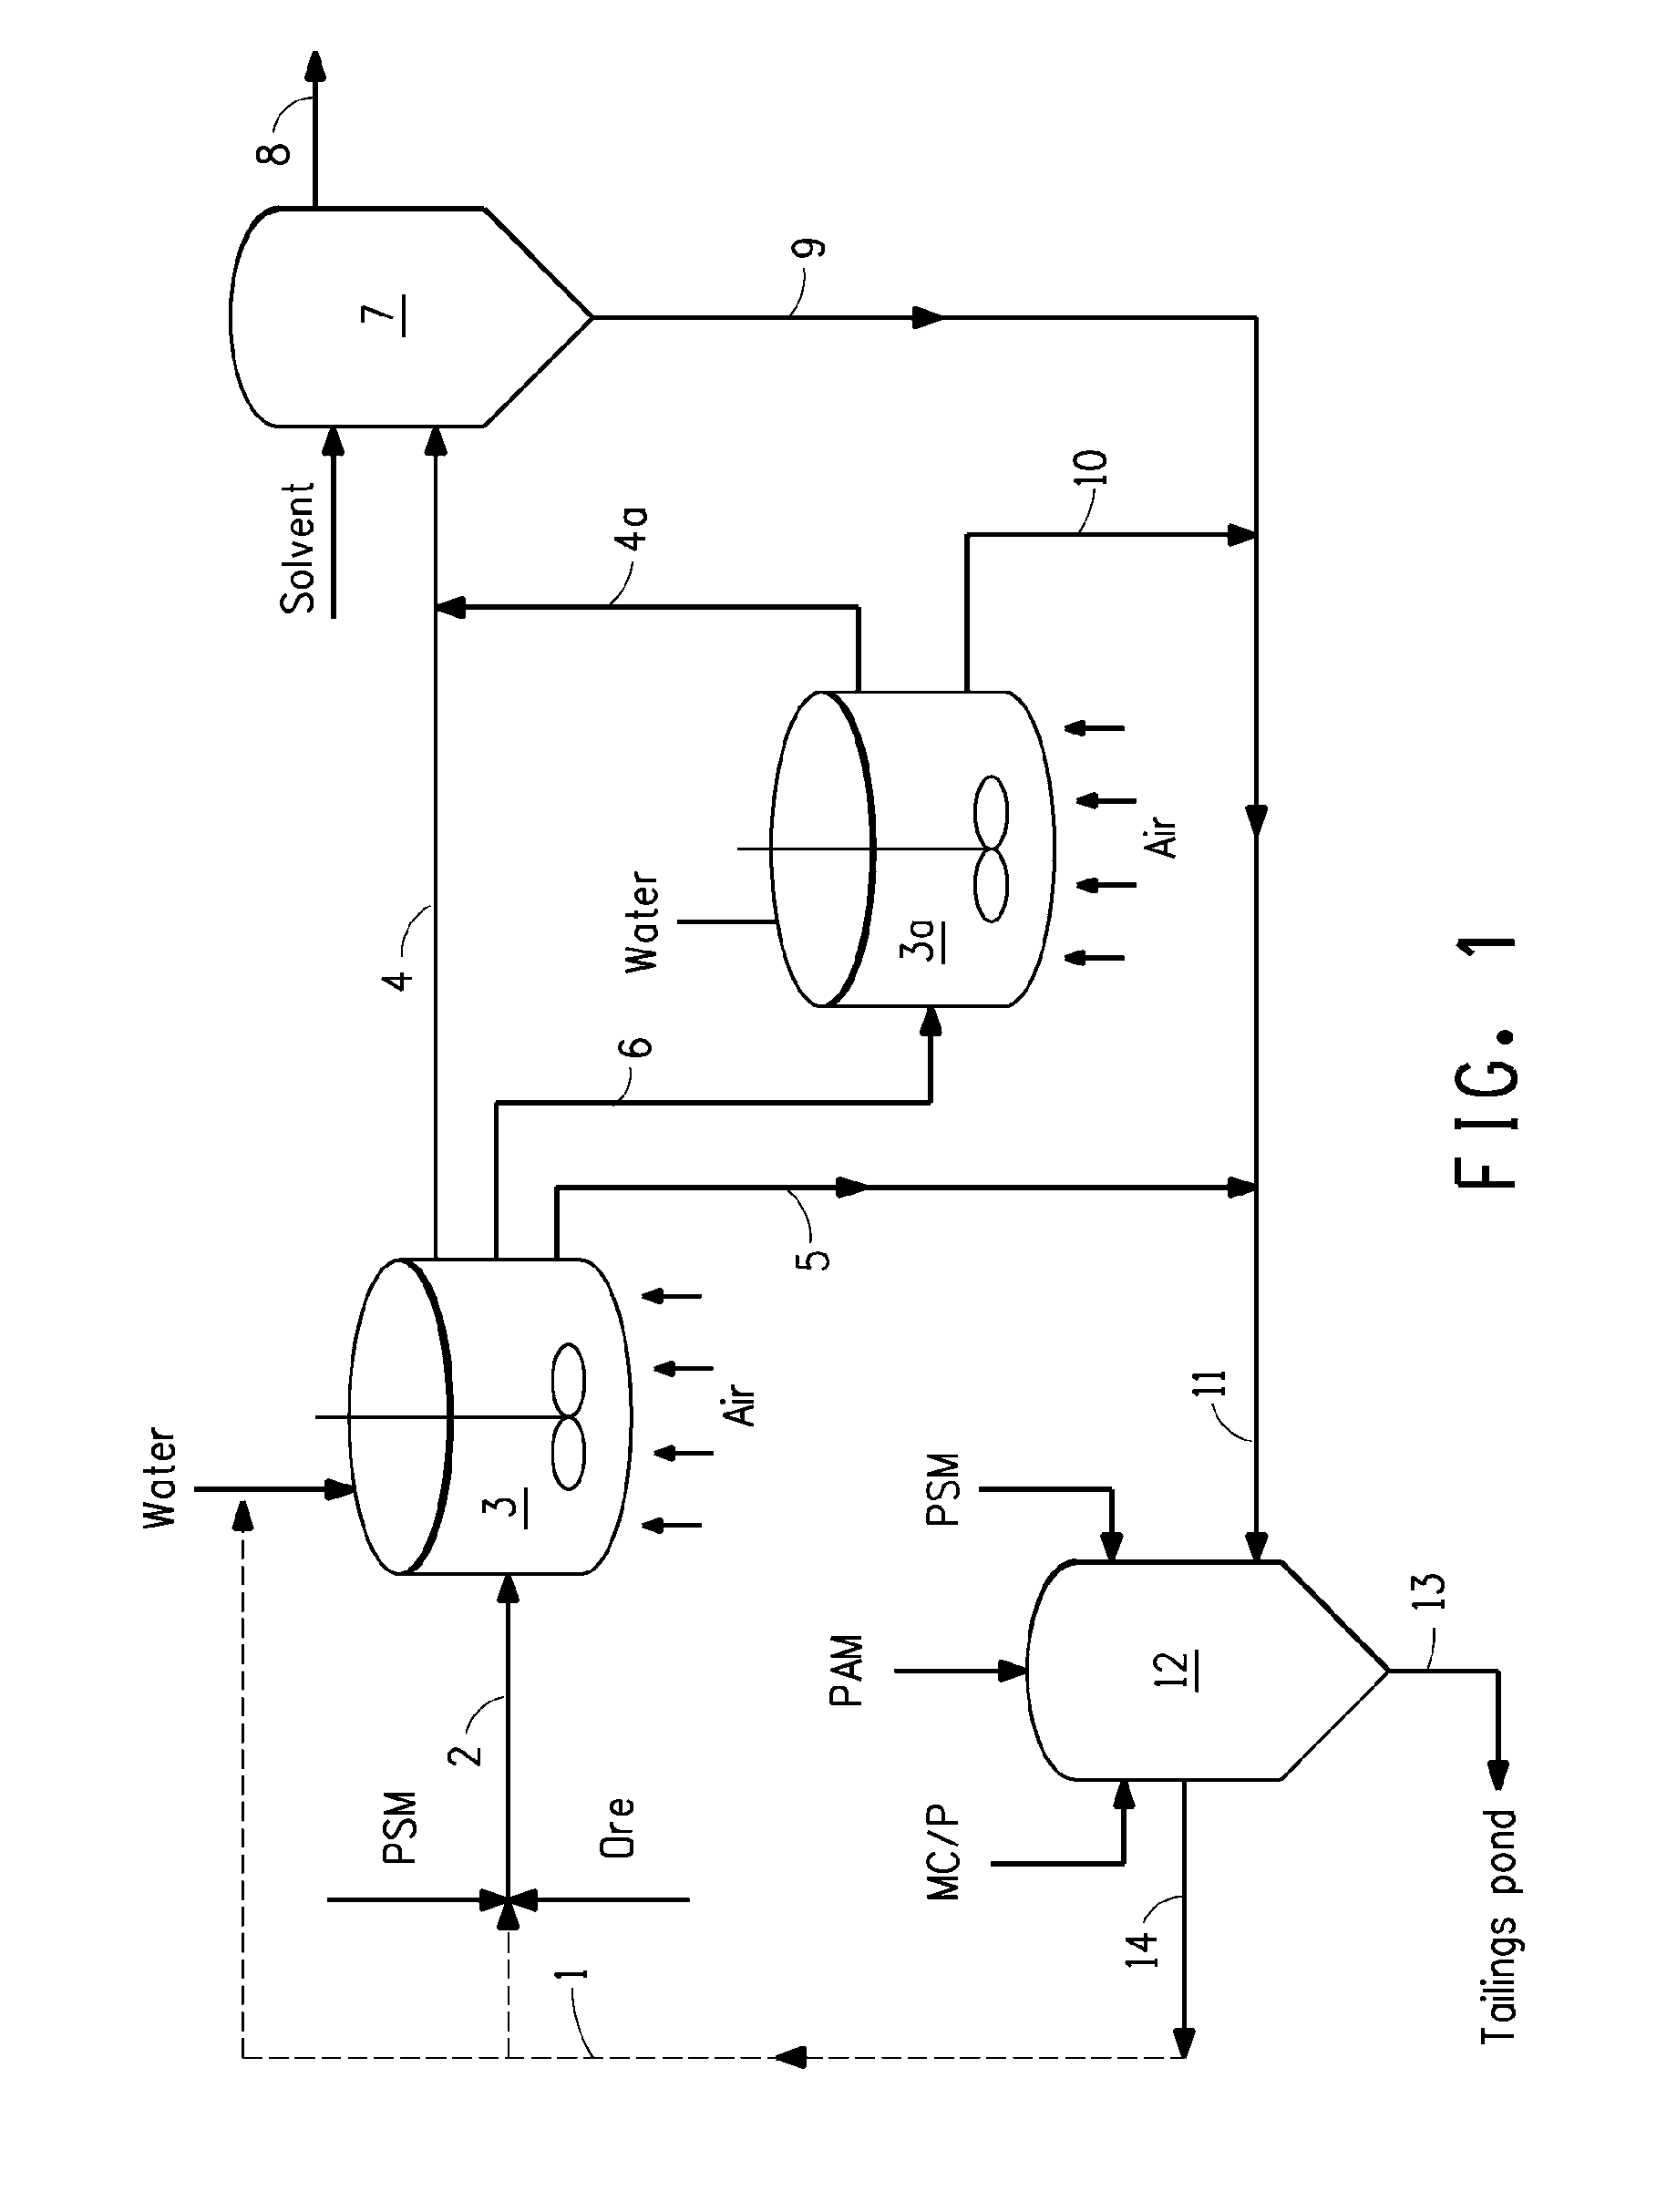 Process for flocculation of a tailings stream